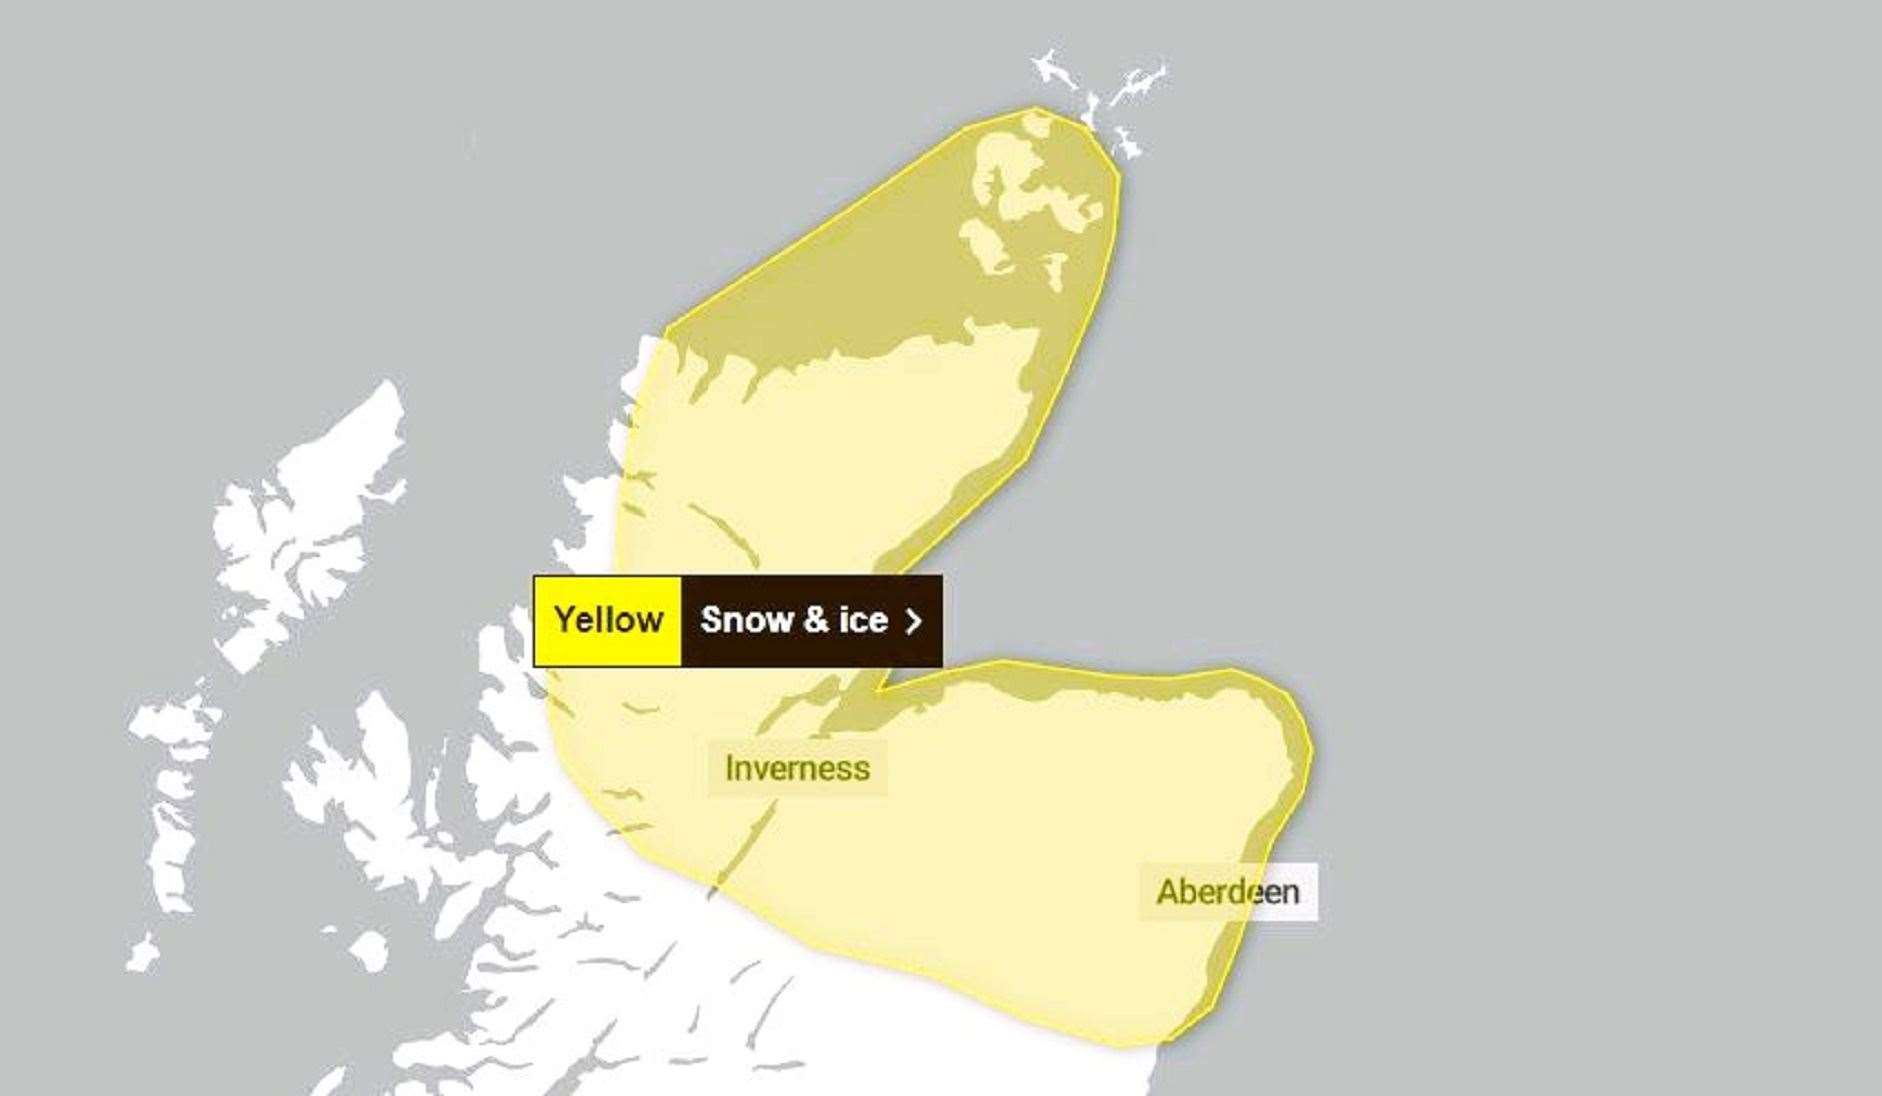 Met Office warning for snow and ice across Caithness later this week.